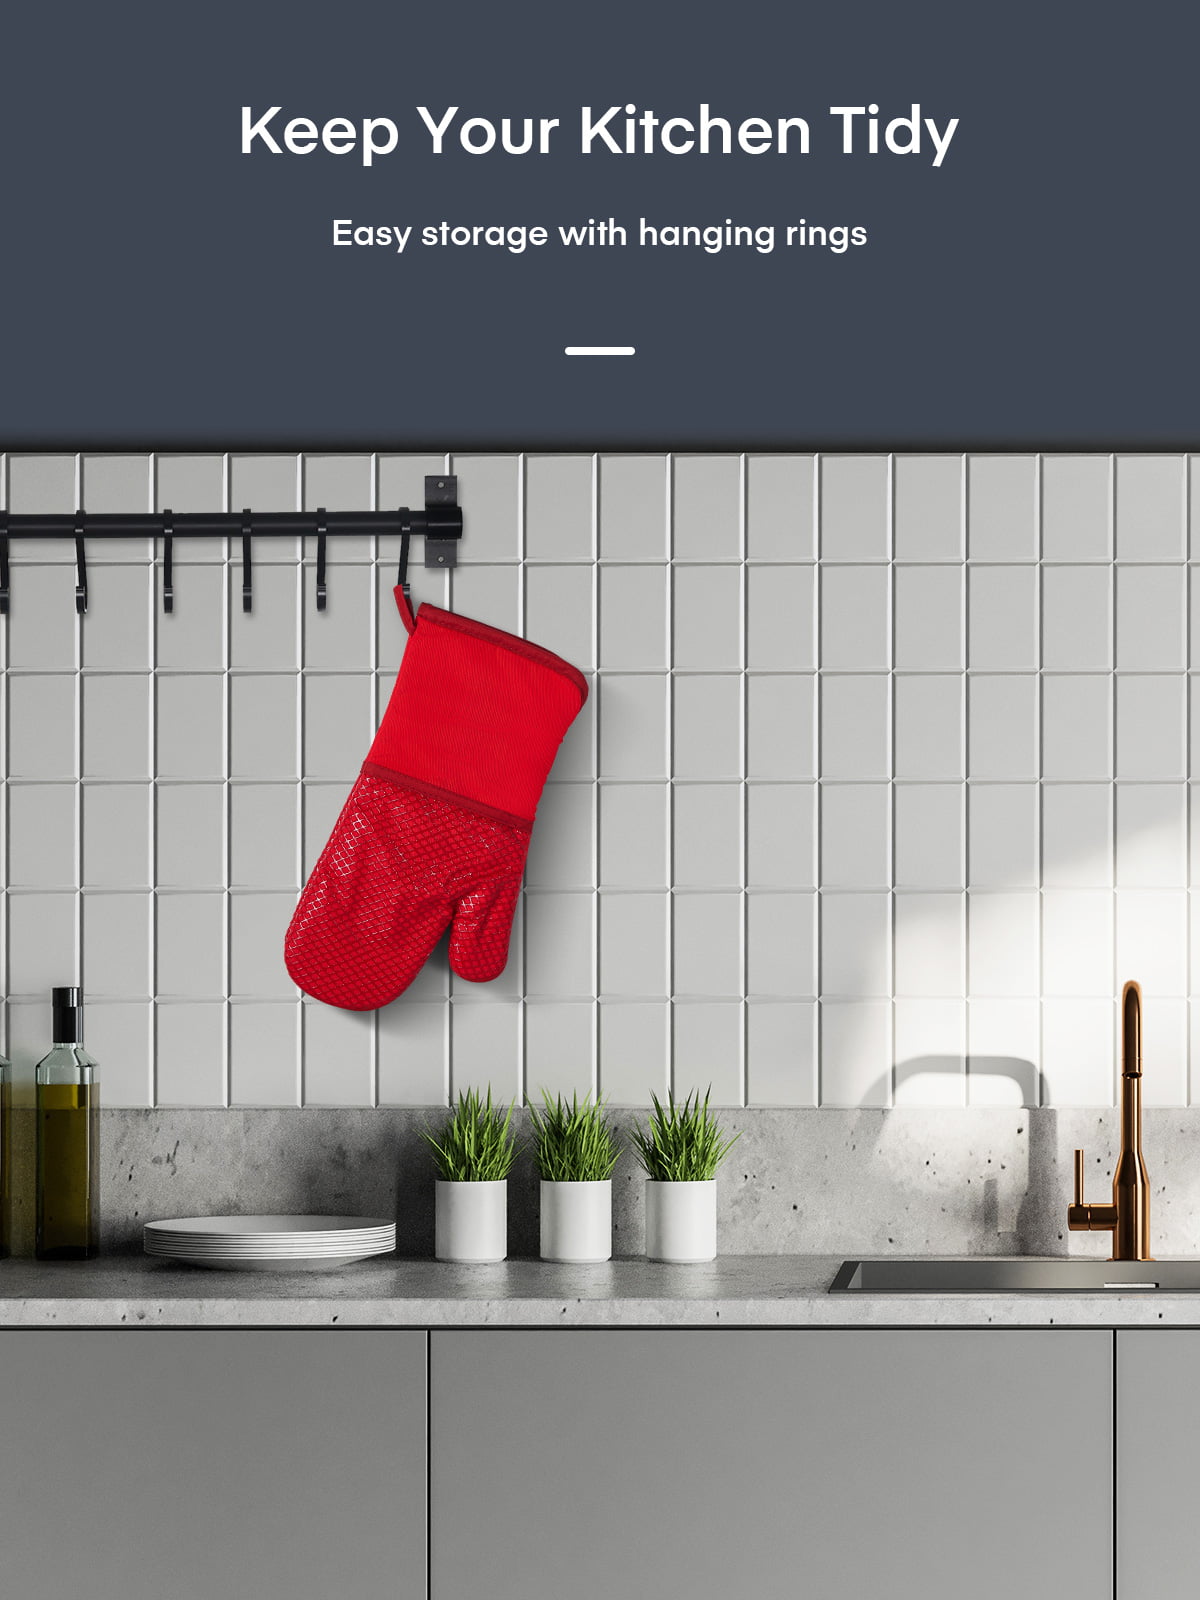 Oven Mitts, Heat Resistant Kitchen Oven Gloves 572°F, Non-Slip Silicone  Surface, Extra Long Flexible Thick Mitts for Kitchen , Cooking , Baking ,  BBQ , Red 